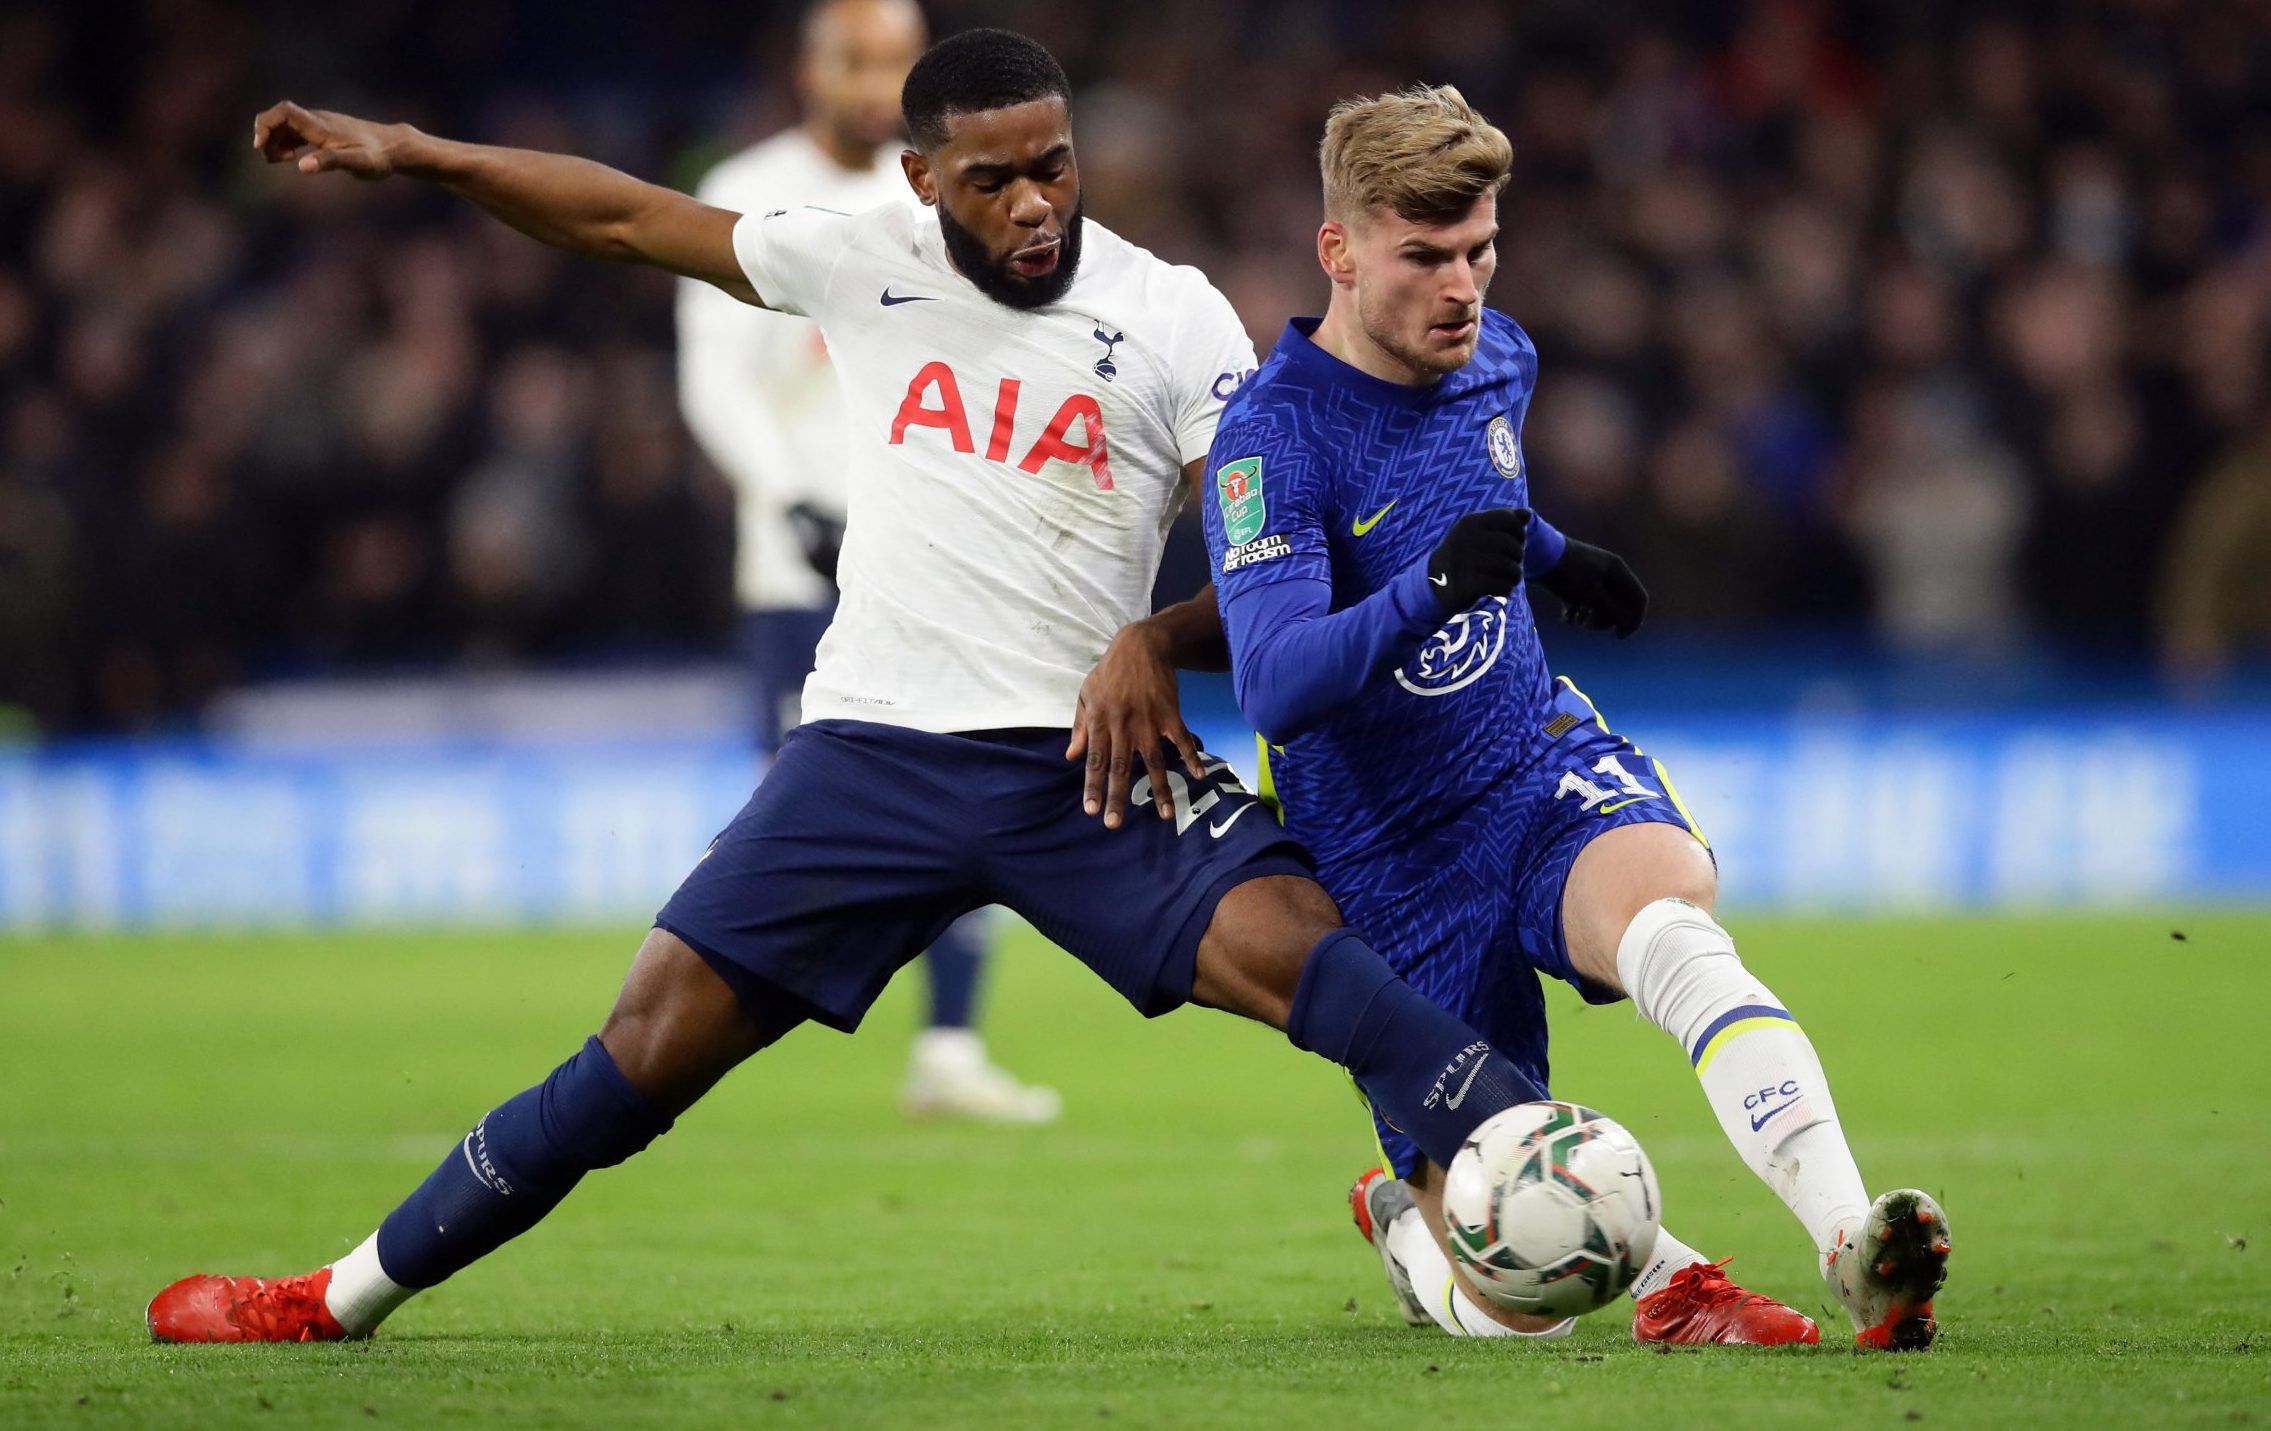 Spurs defender Japhet Tanganga in action against Chelsea in the Carabao Cup semi-final